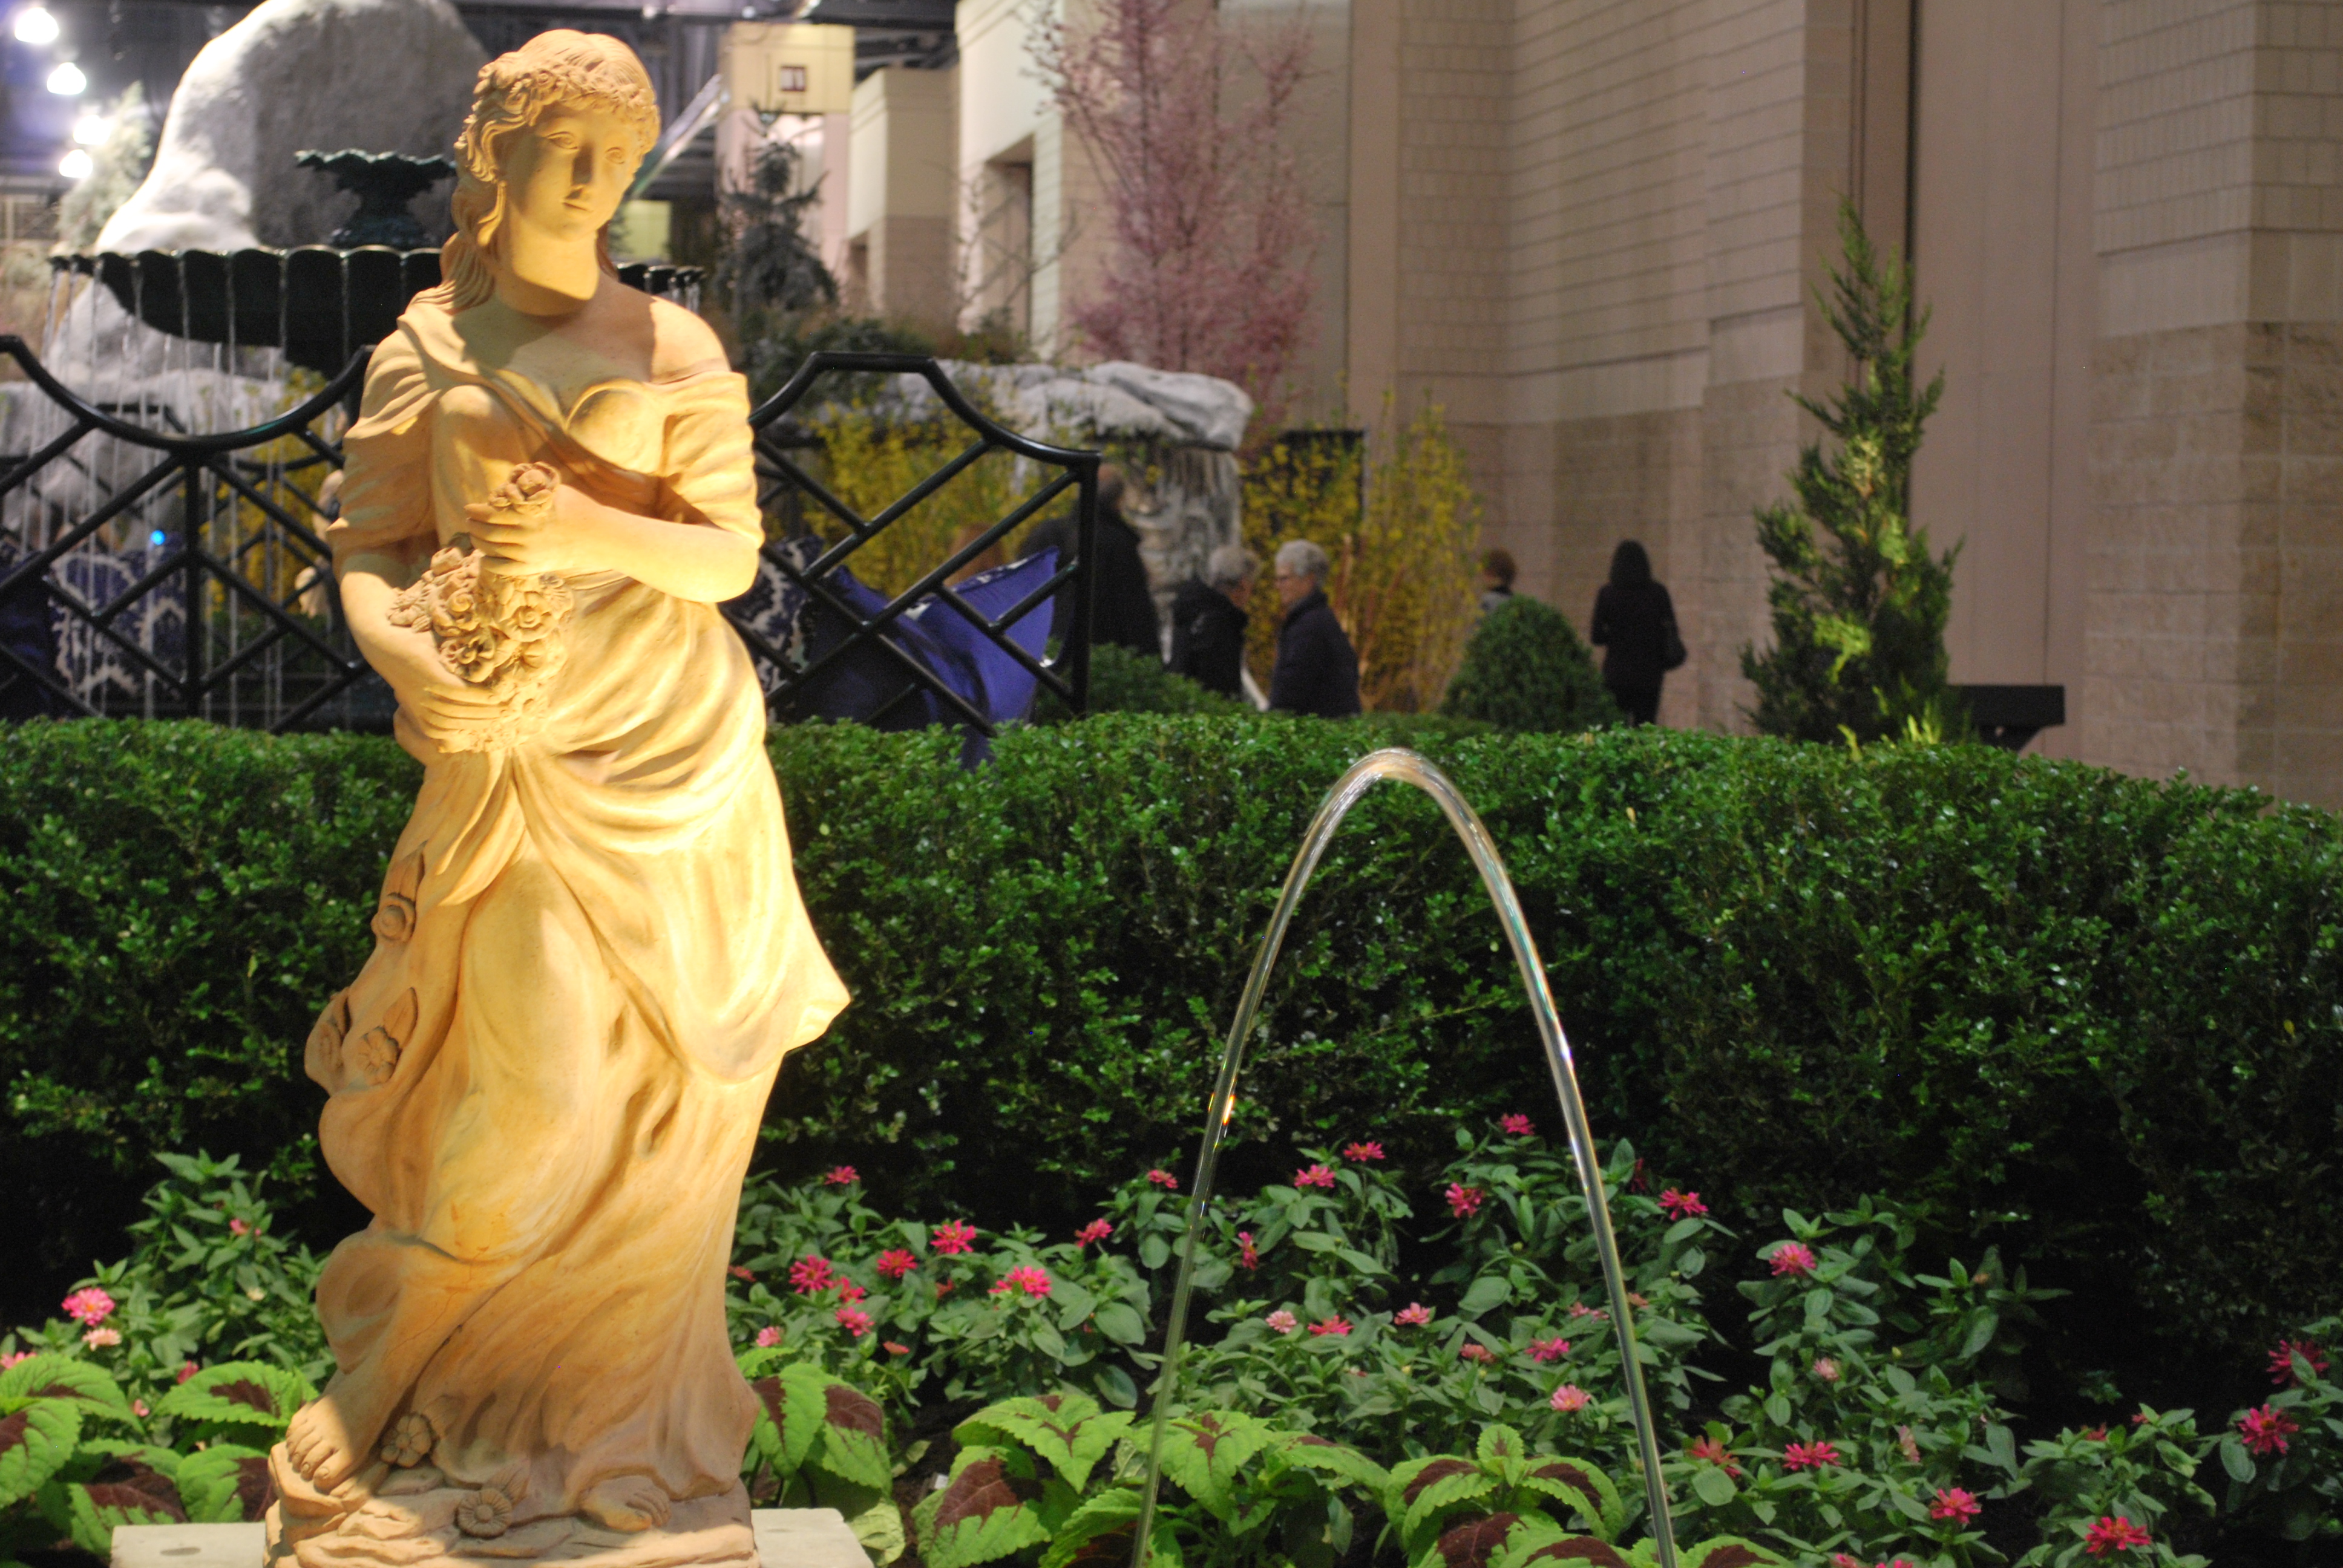 The Burke Brothers' "La Fontaine Elegance of Water" at the Philadelphia Flower Show